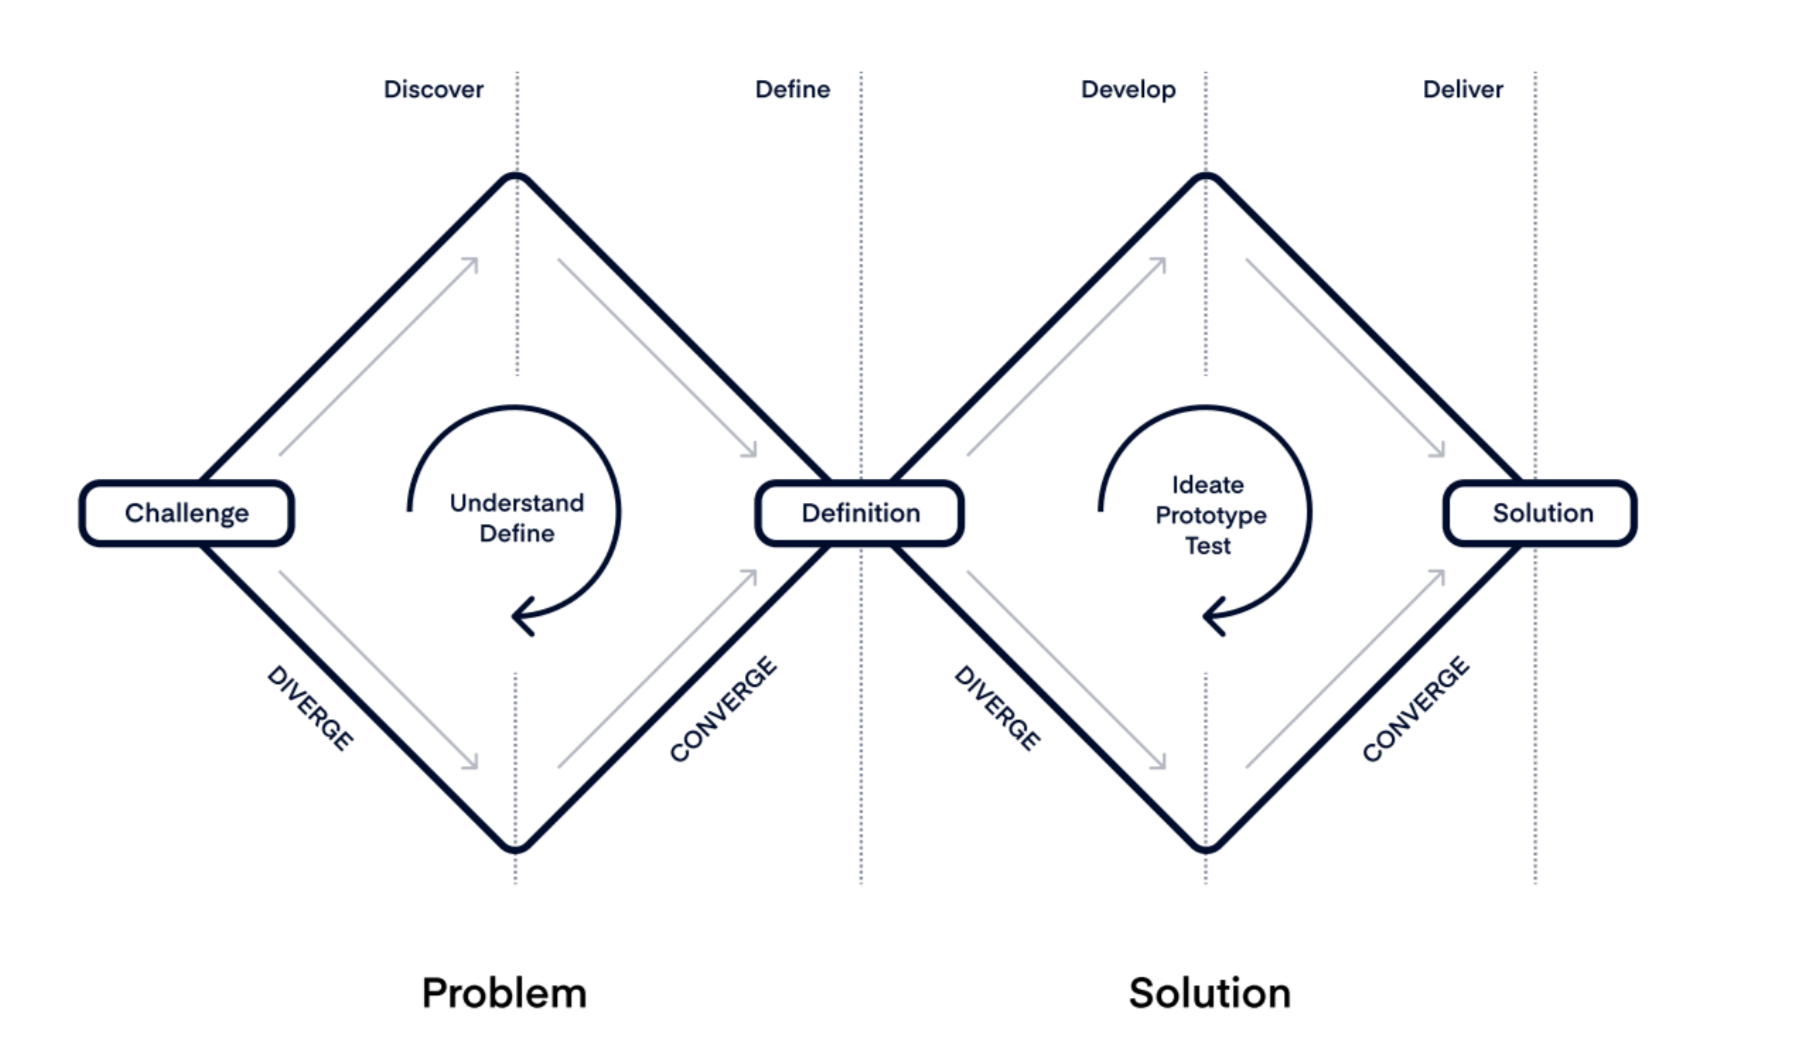 A guide to using the “Double Diamond” framework to score product home runs